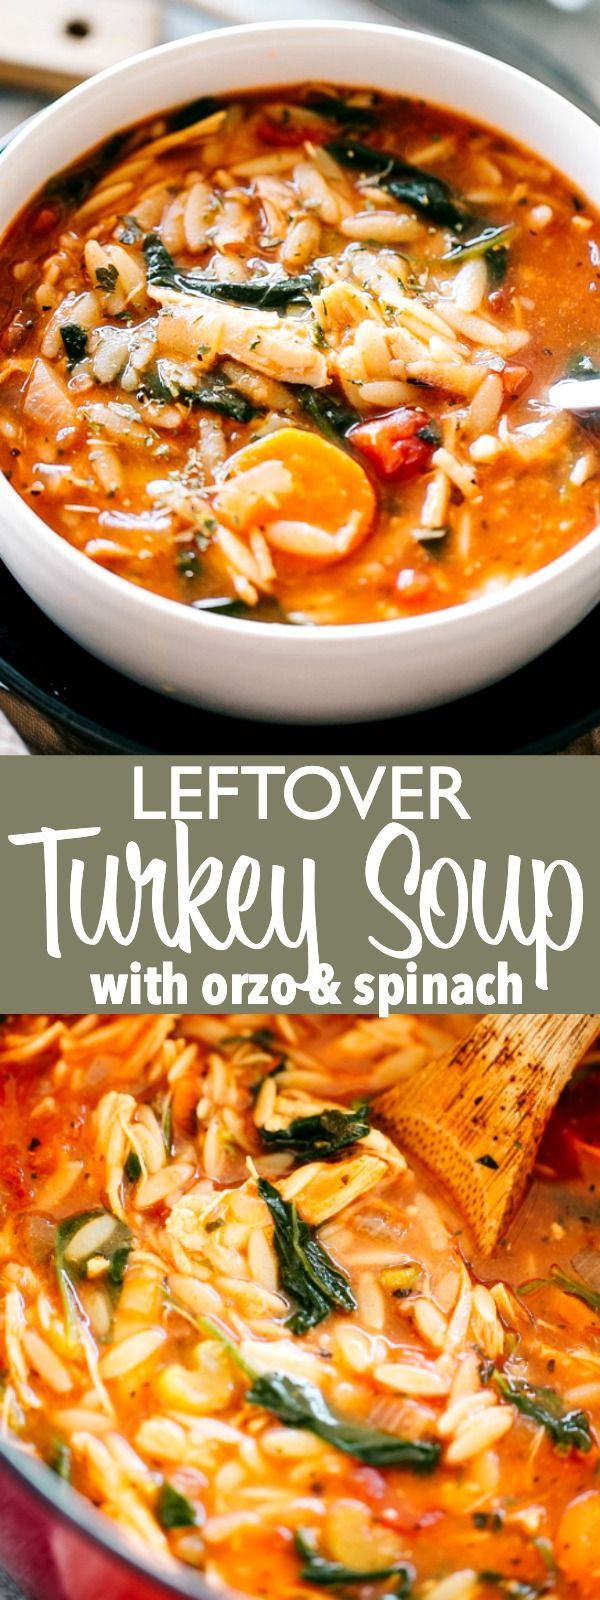 Turkey Soup Recipe with Orzo and Spinach -   19 turkey soup crockpot healthy ideas